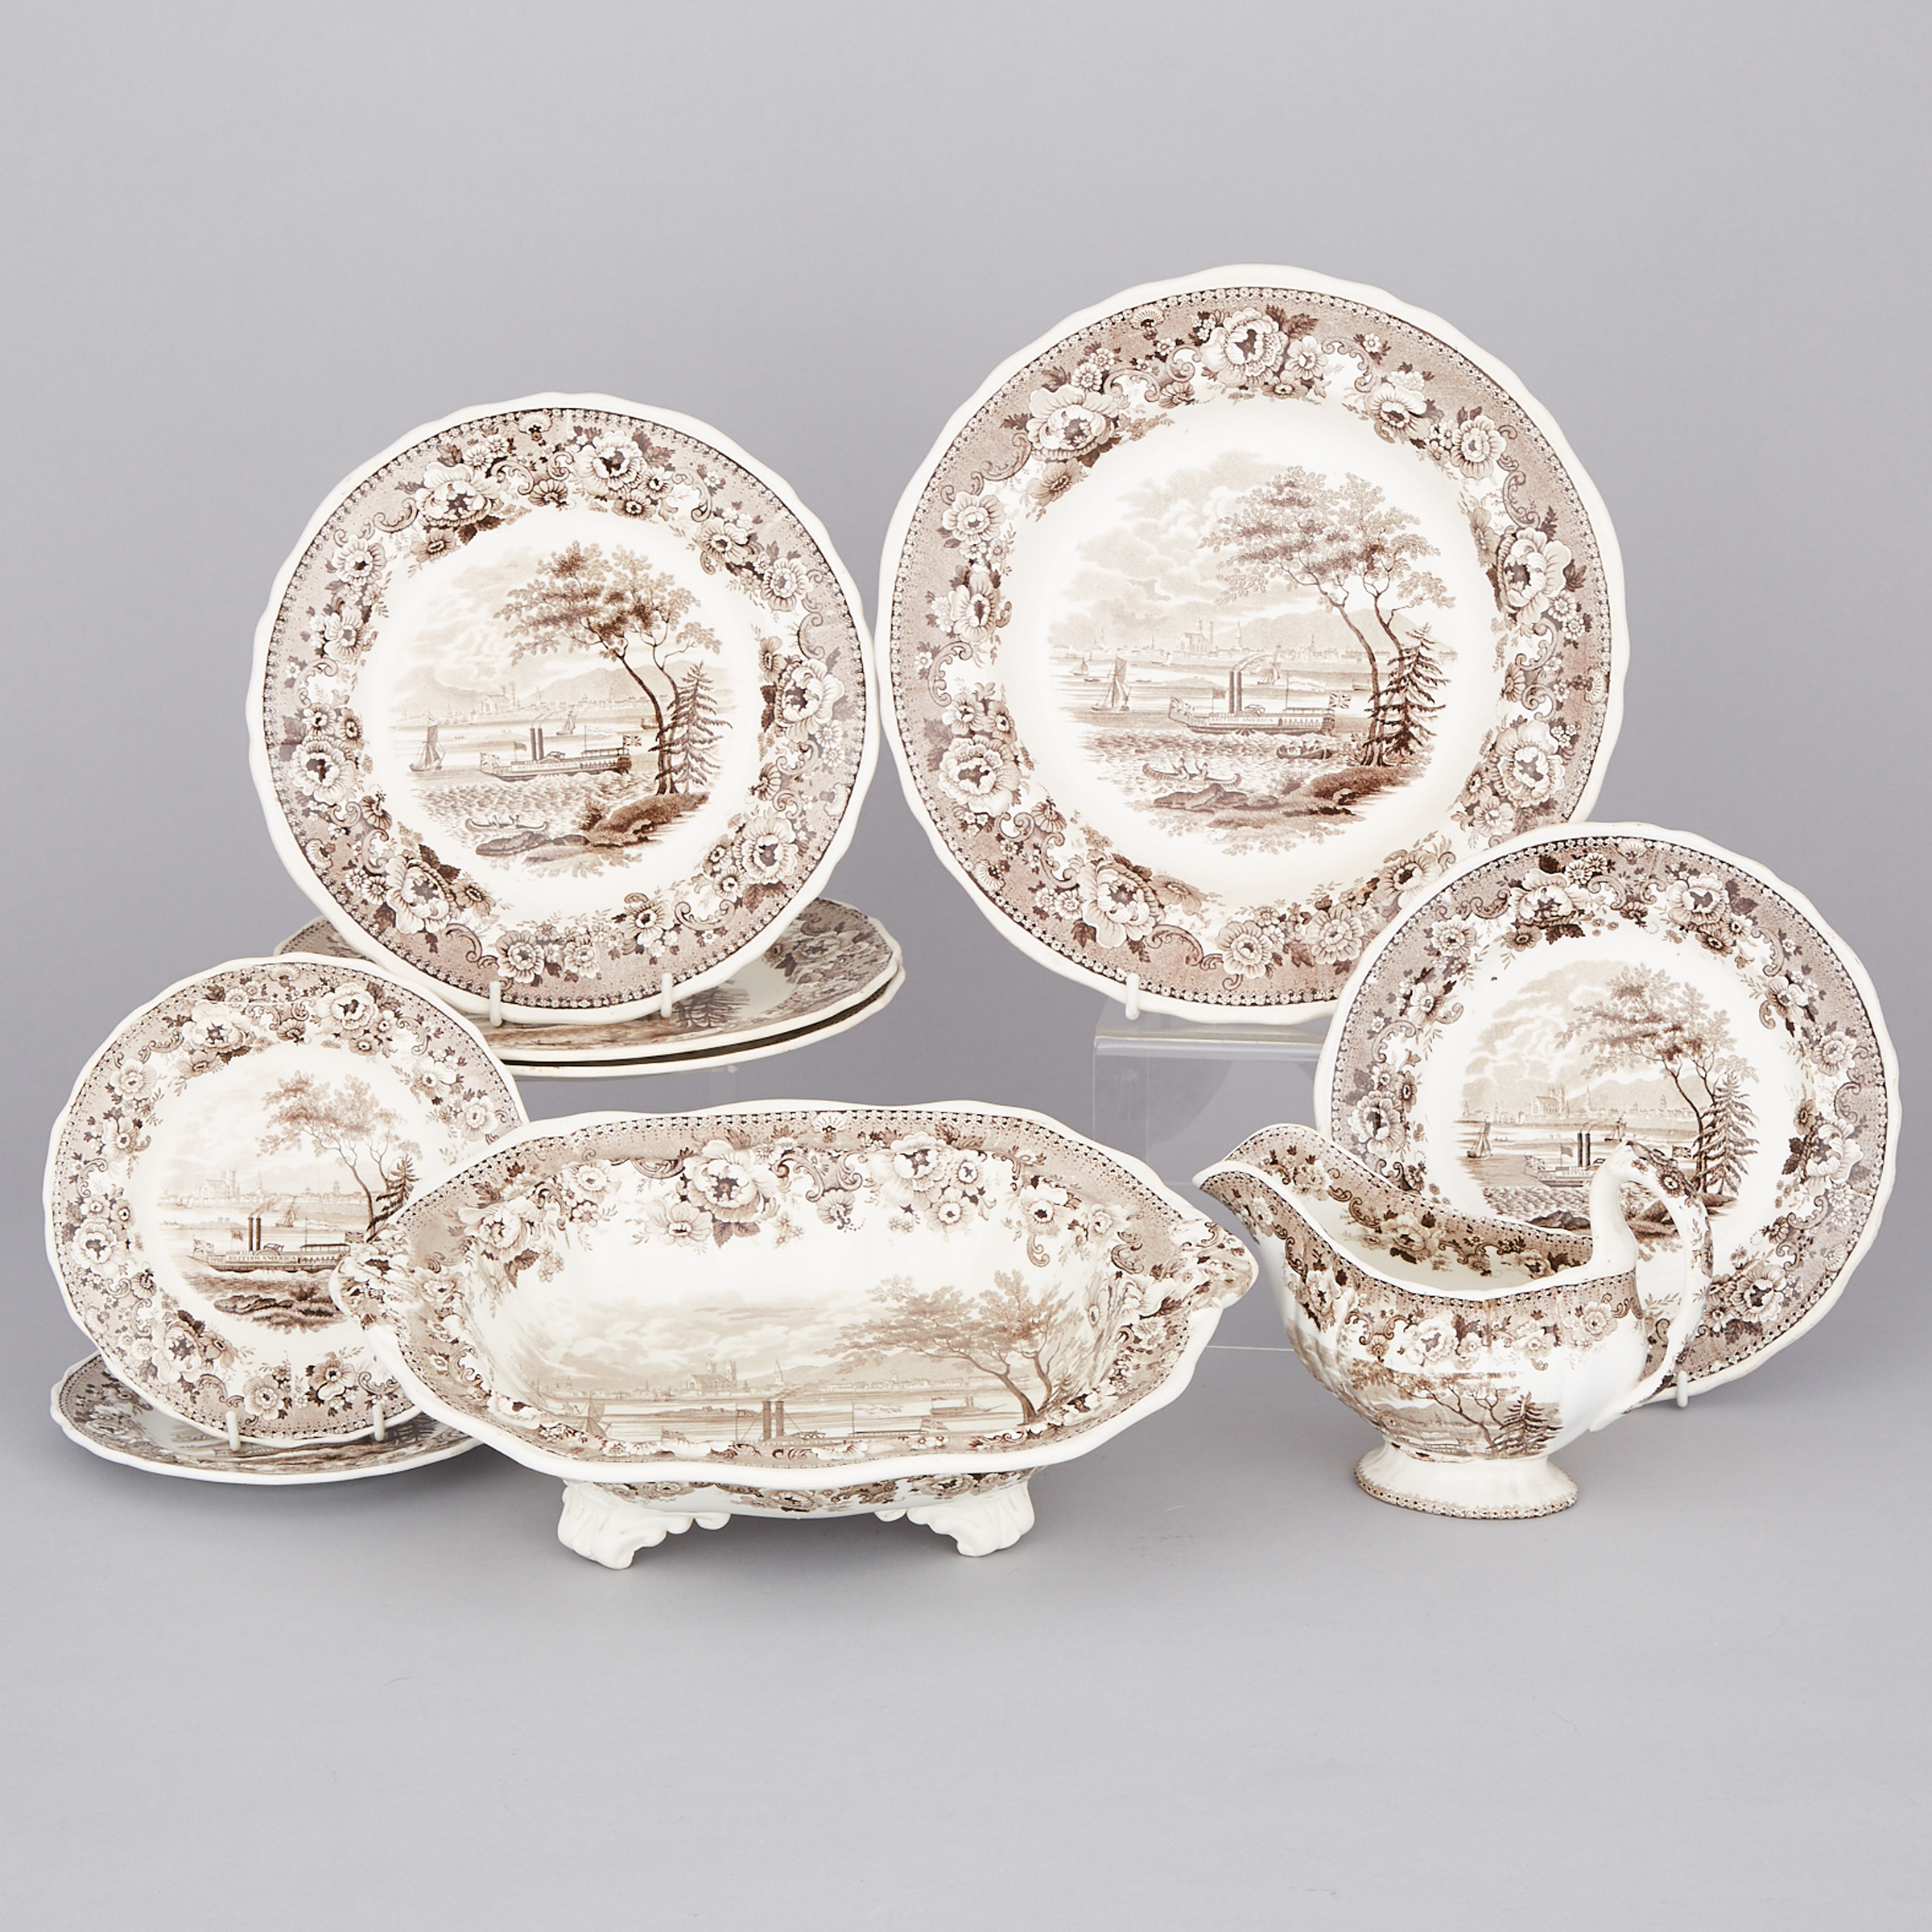 Seven Davenport ‘Montreal’ Plates, a Sauce Boat and Serving Dish, c.1835